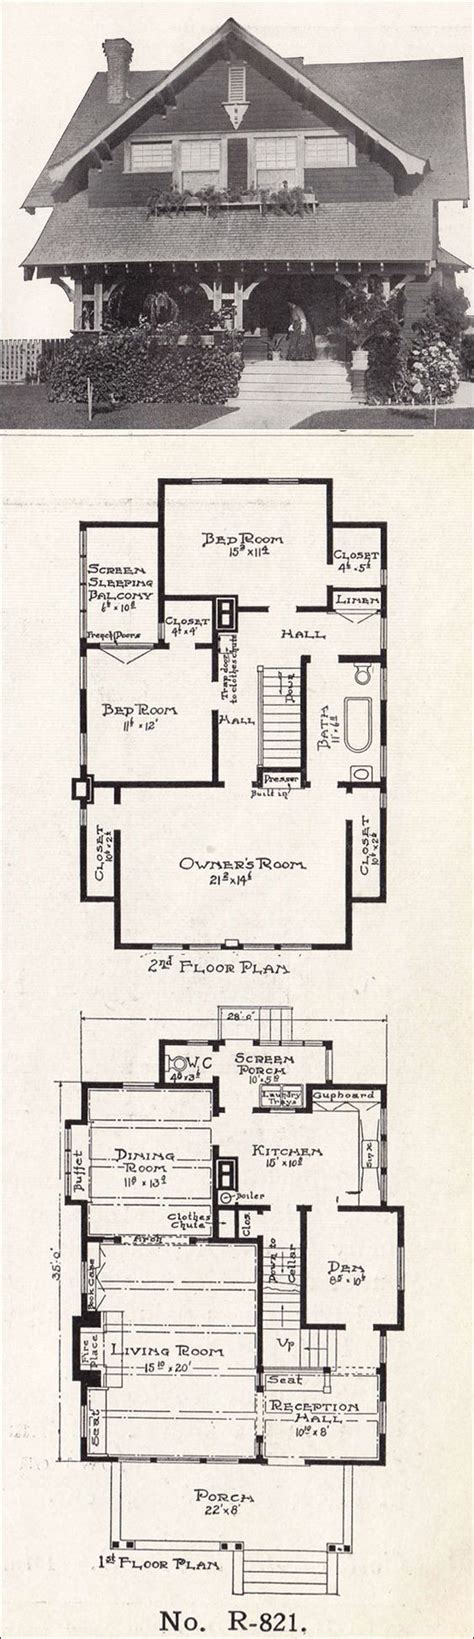 awesome original bungalow style floorplan wouldnt    update   today